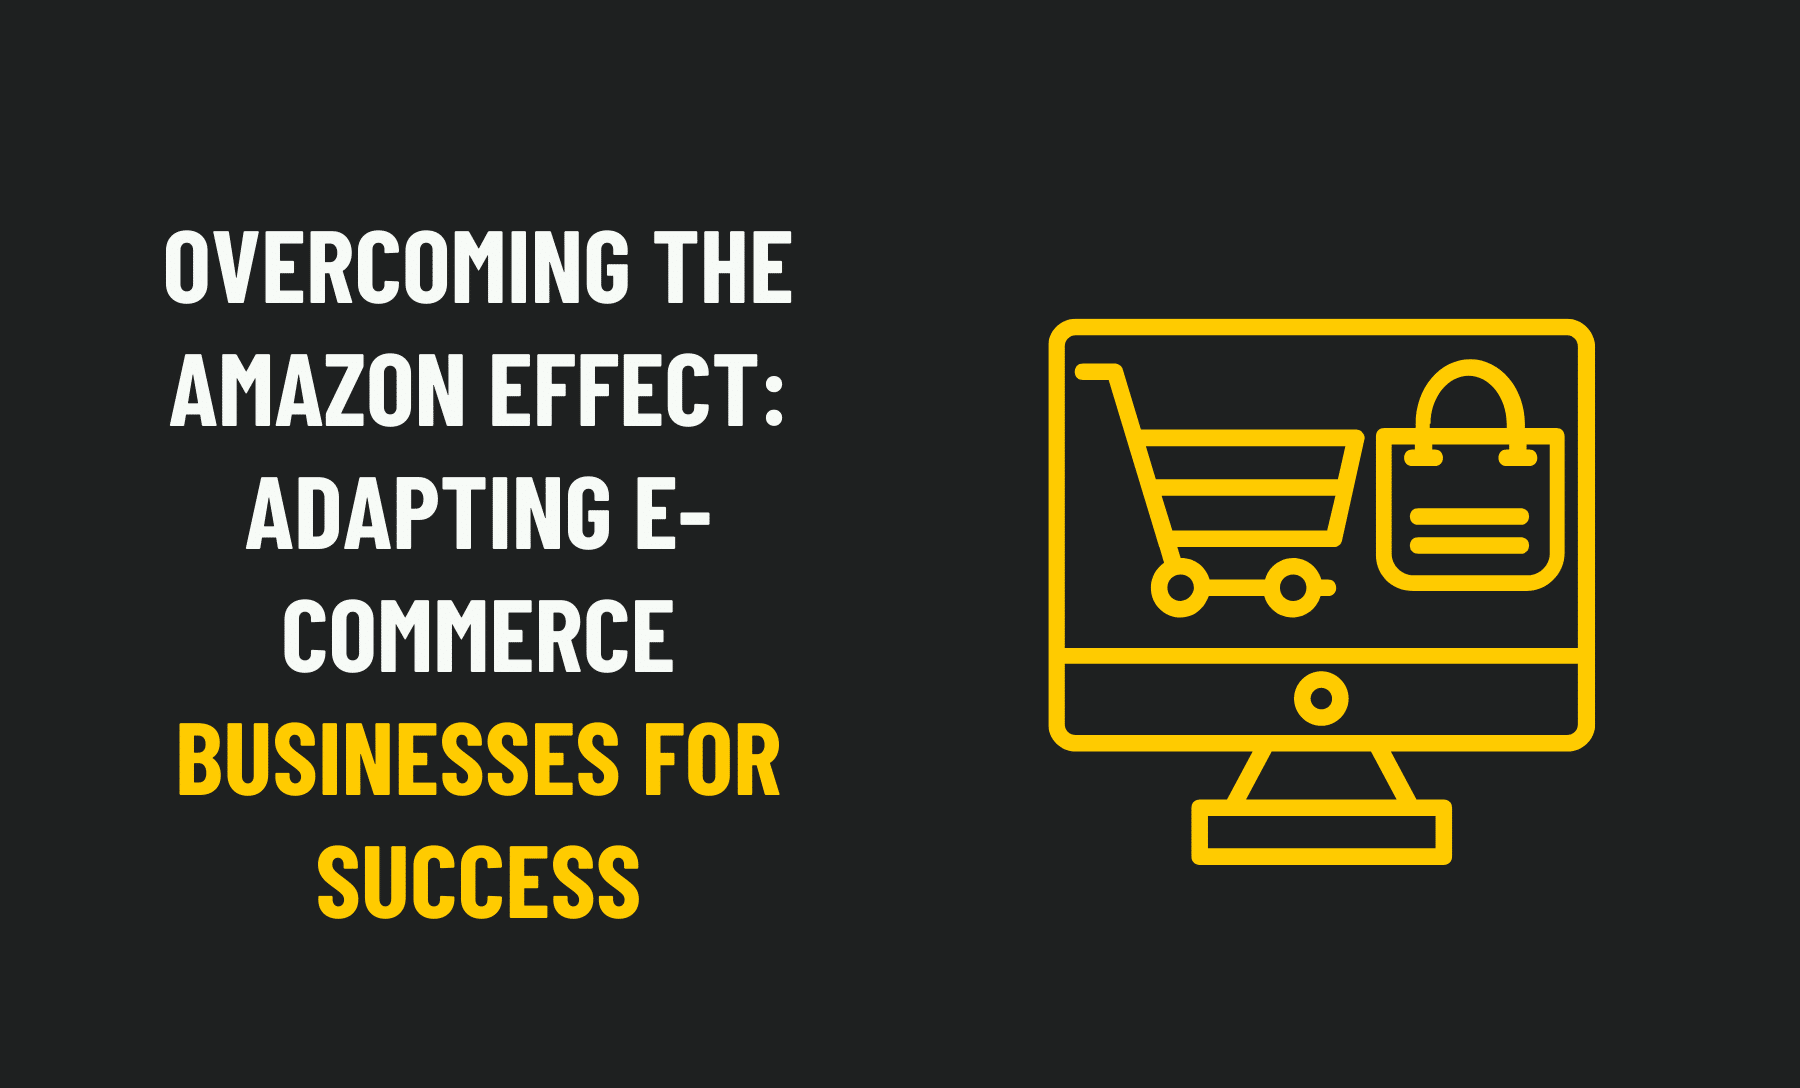 Overcoming the Amazon Effect: Adapting E-commerce Businesses for Success